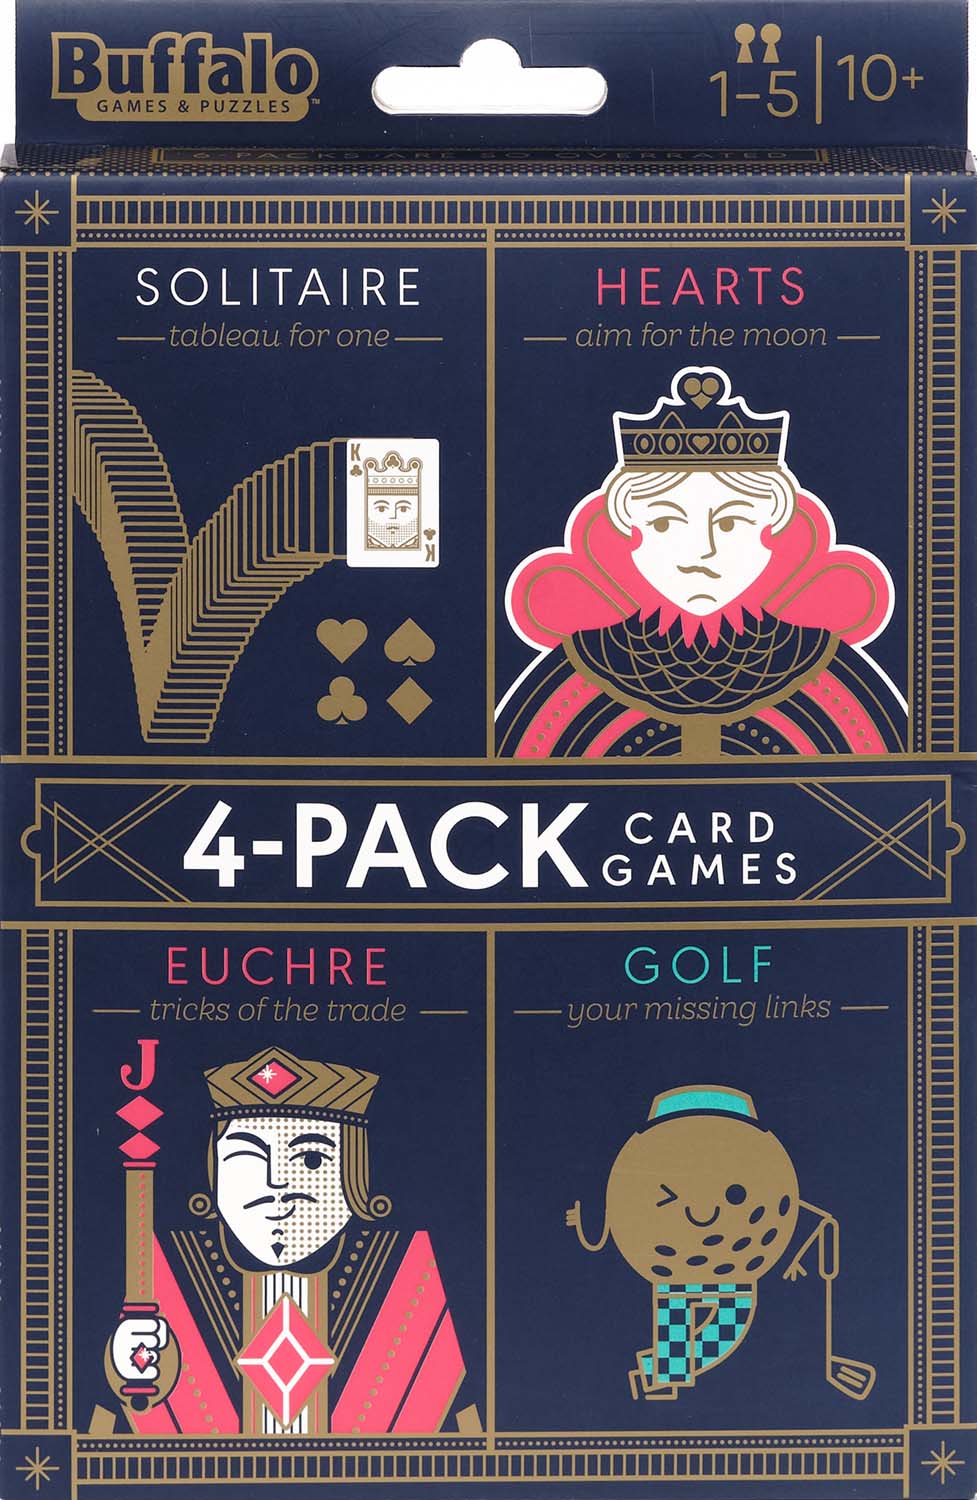 4-Pack of Card Games- Solitaire, Hearts, Euchre, Golf